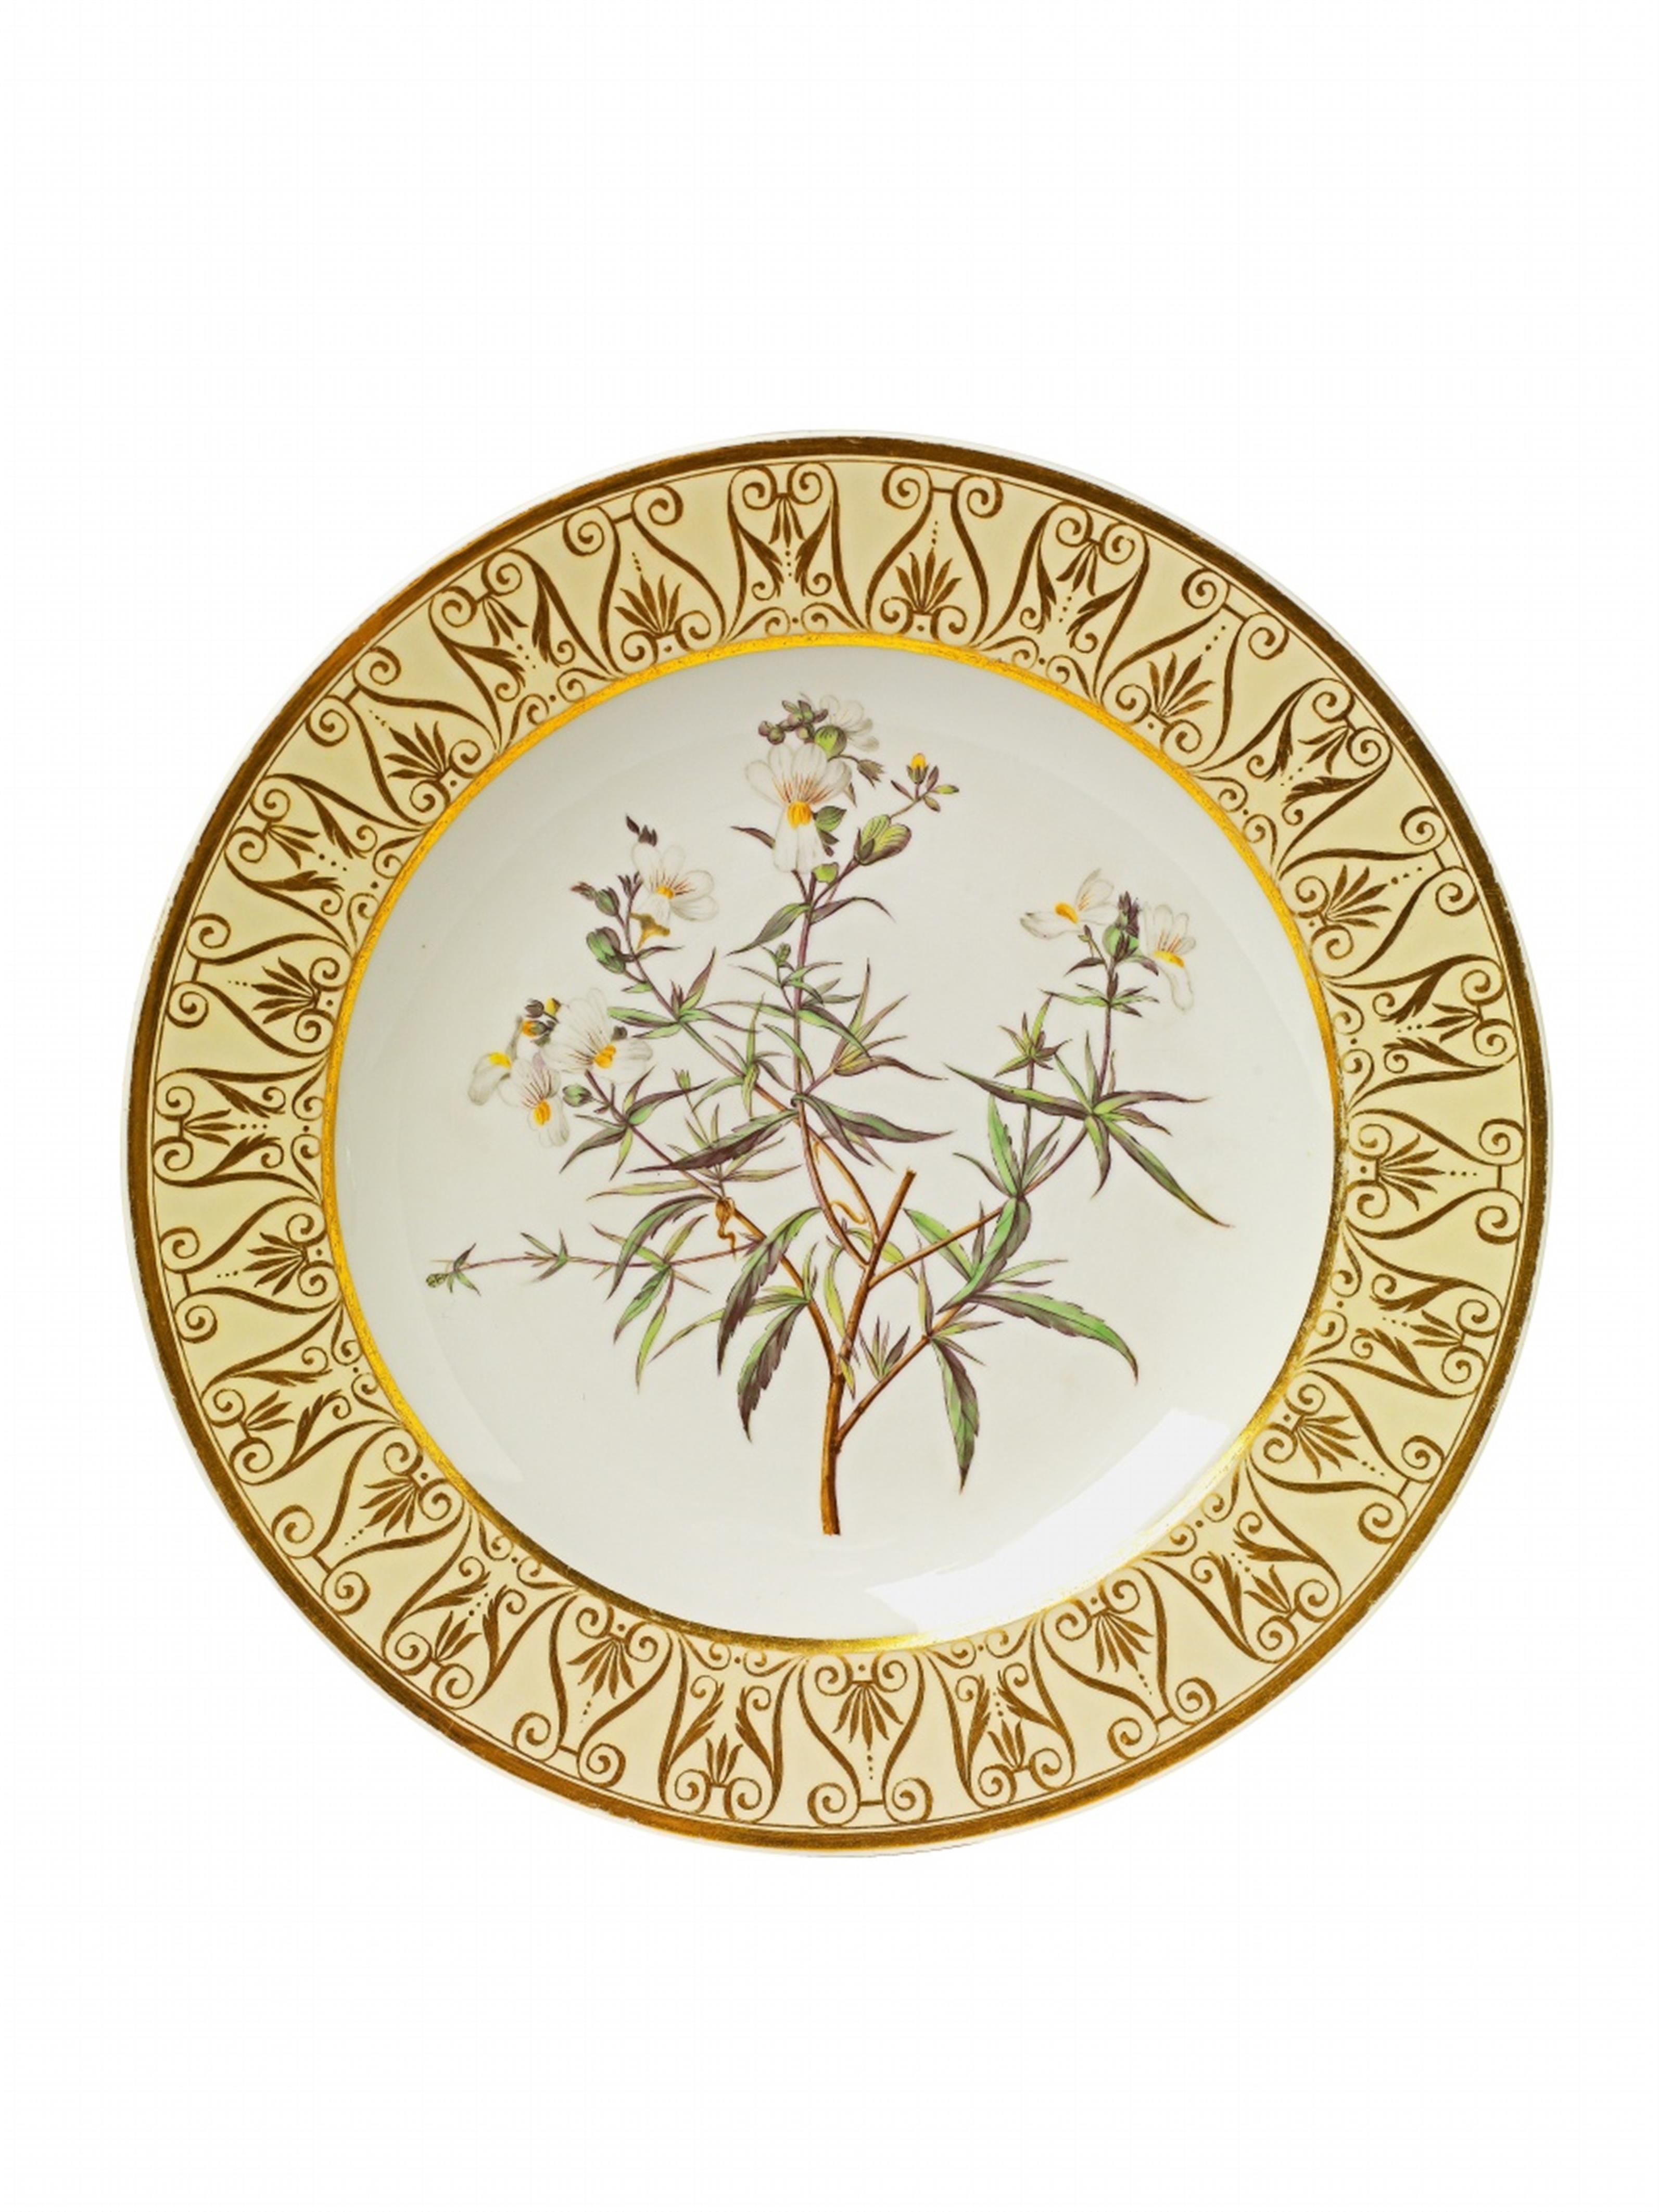 A Berlin KPM porcelain plate from the botanical service for Empress Joséphine - image-4